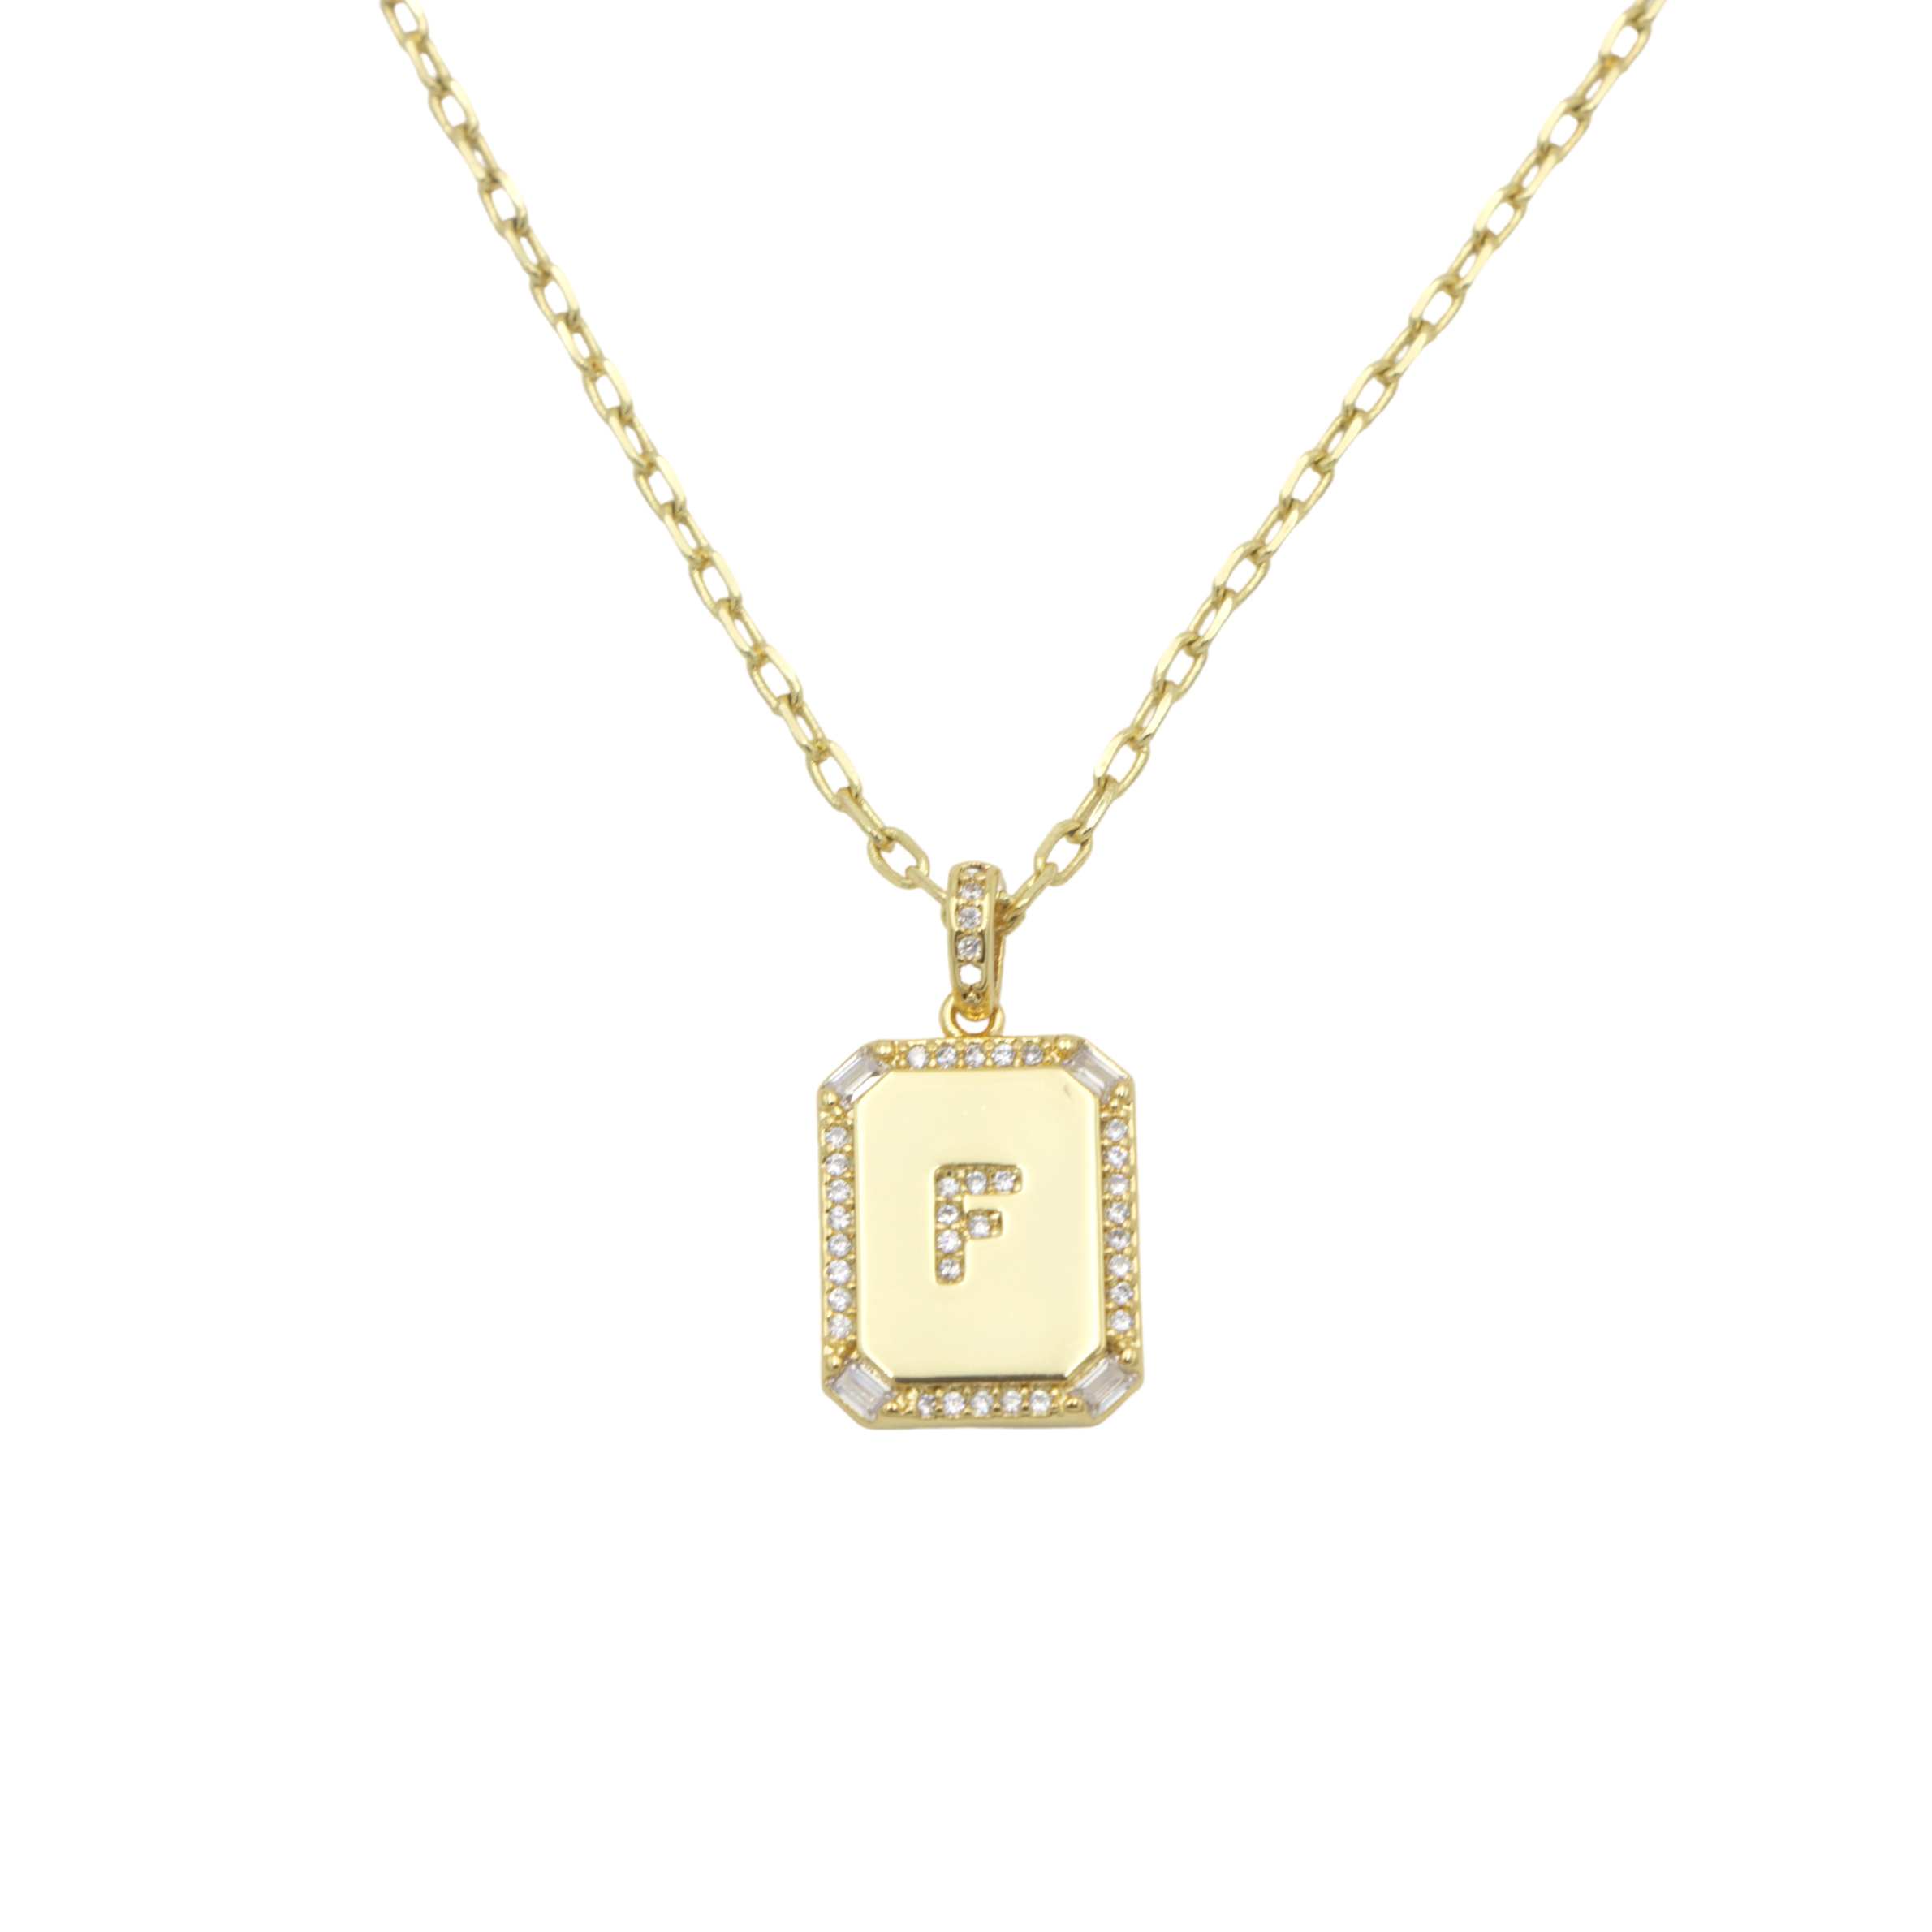 AW Boutique's gold filled 16 inch cable chain necklace finished with a dainty initial pendant with cubic zirconia detail. F initial shown.